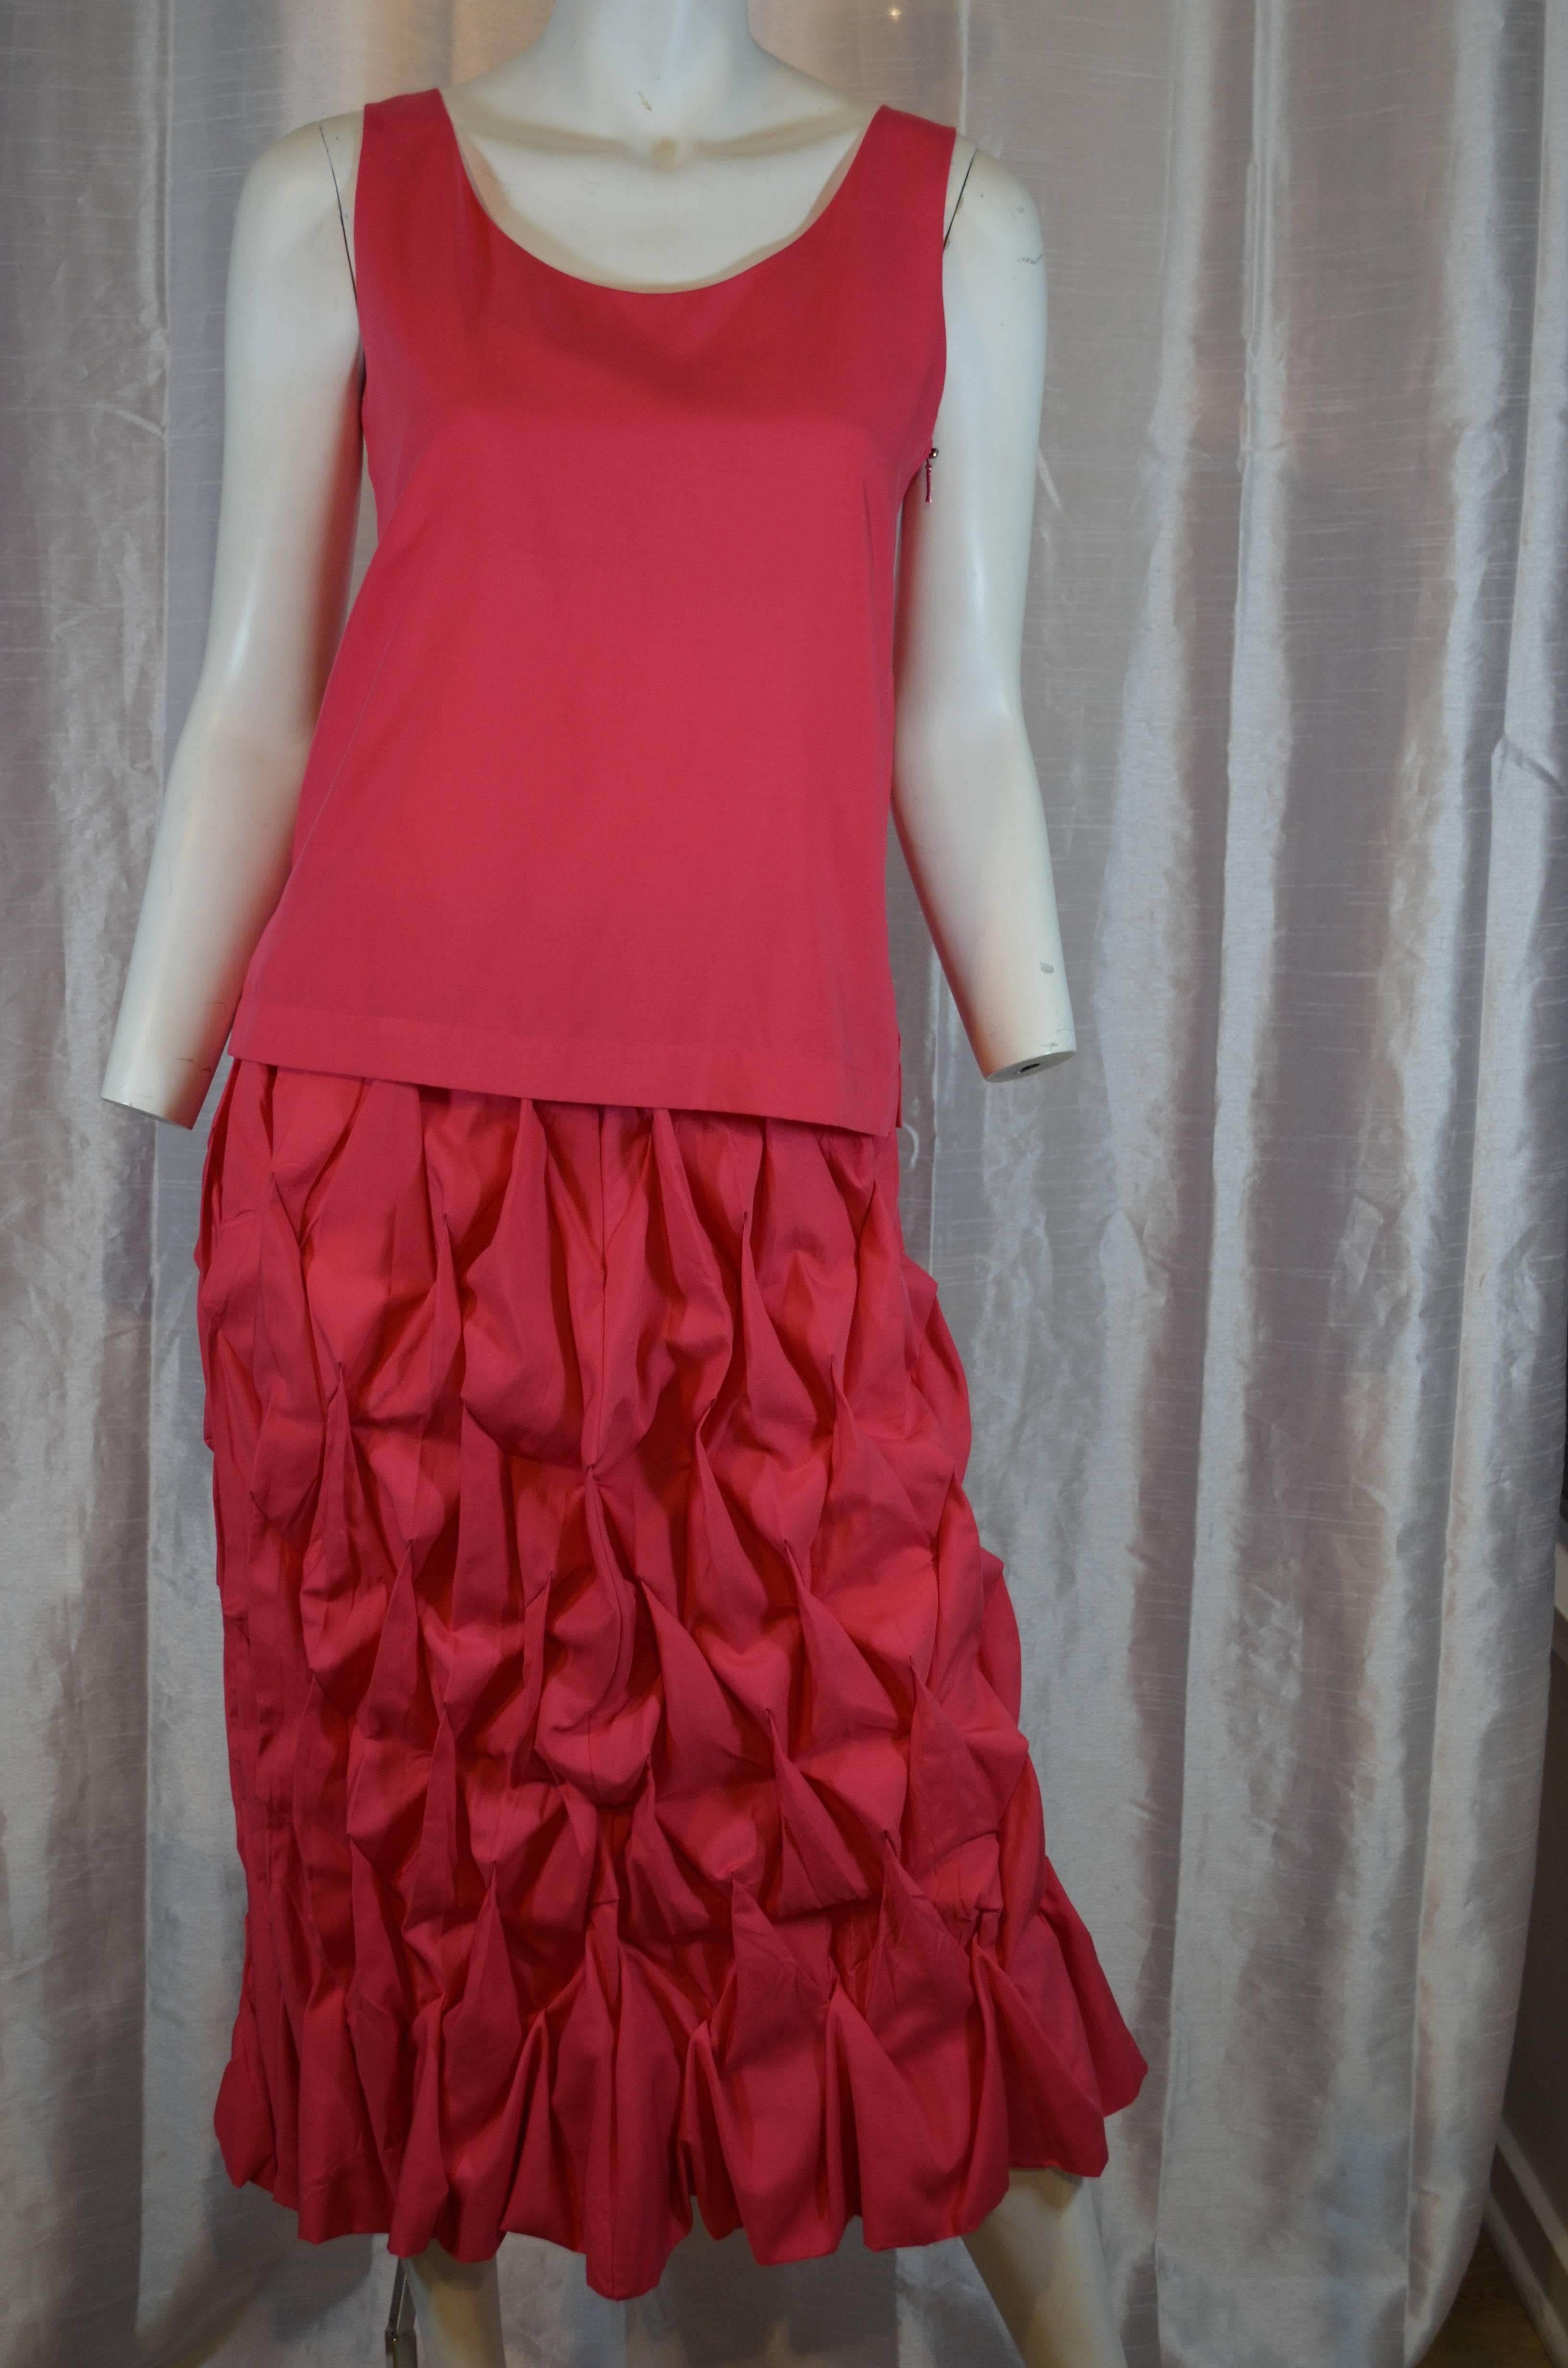 Issey Miyake Pink Skirt Set In Good Condition For Sale In Carmel, CA